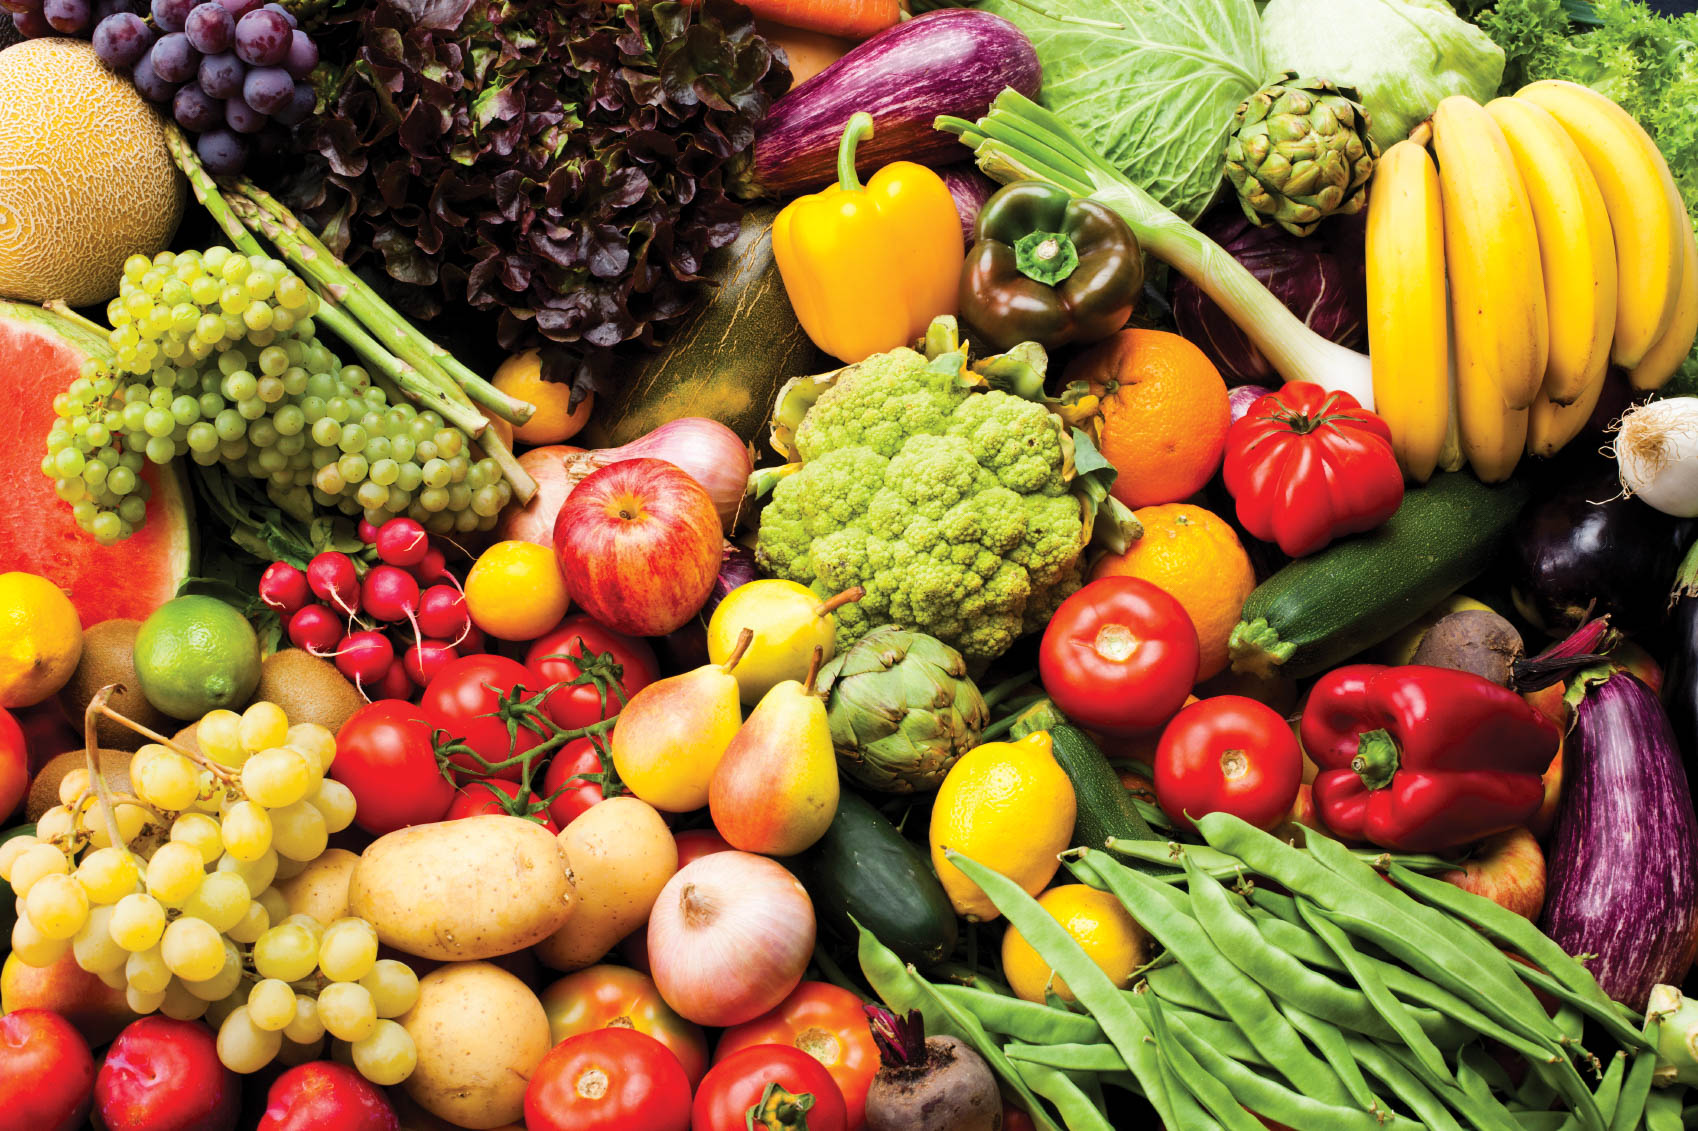 Assortment of fruits and vegetables.